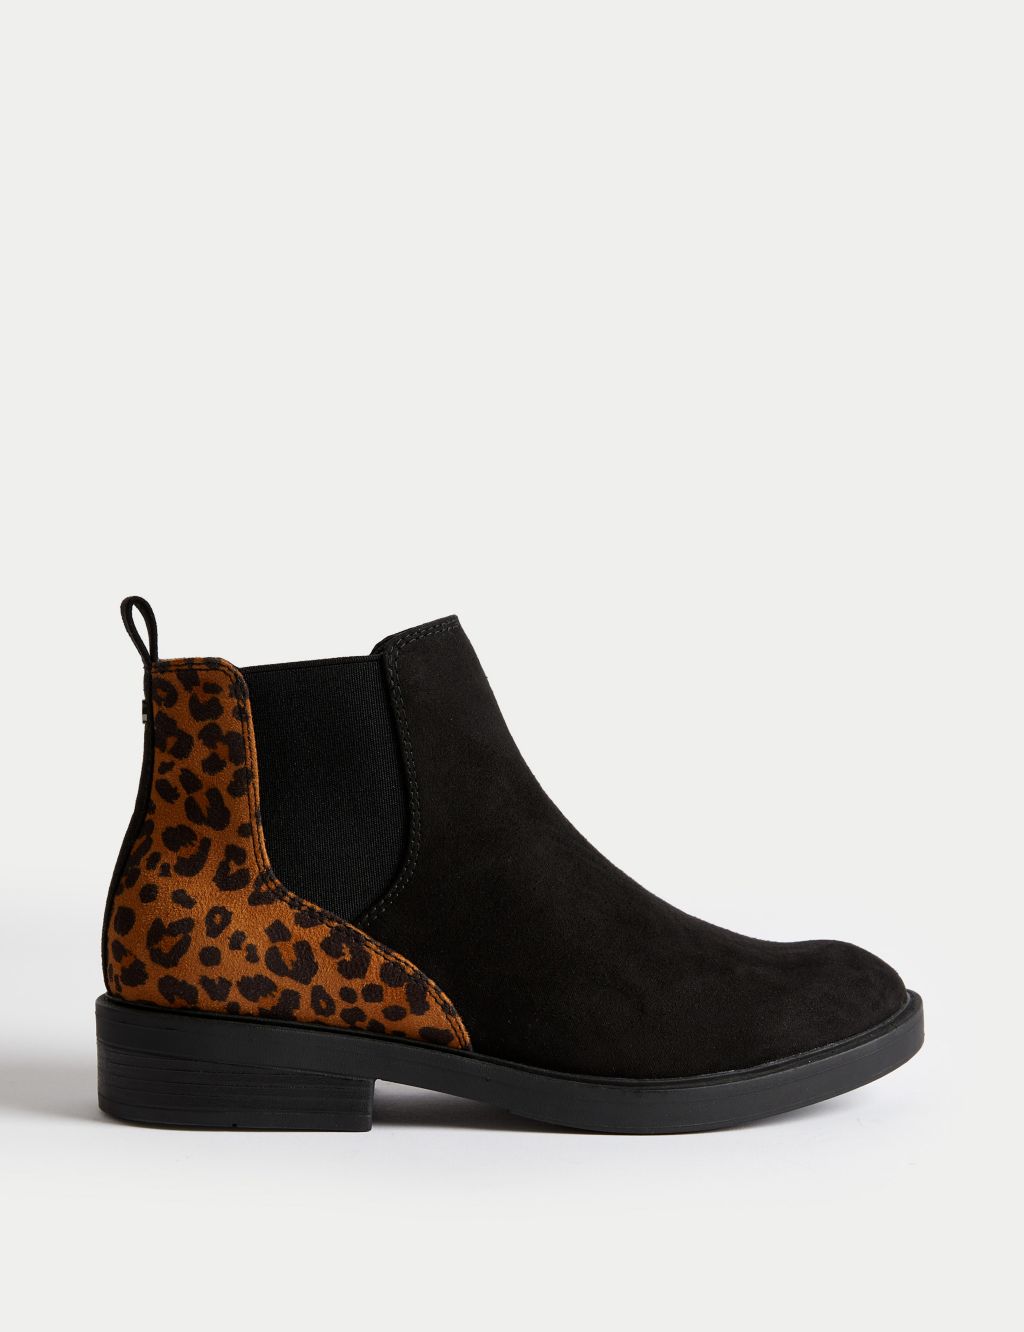 Chelsea Animal Print Flat Ankle Boots image 1